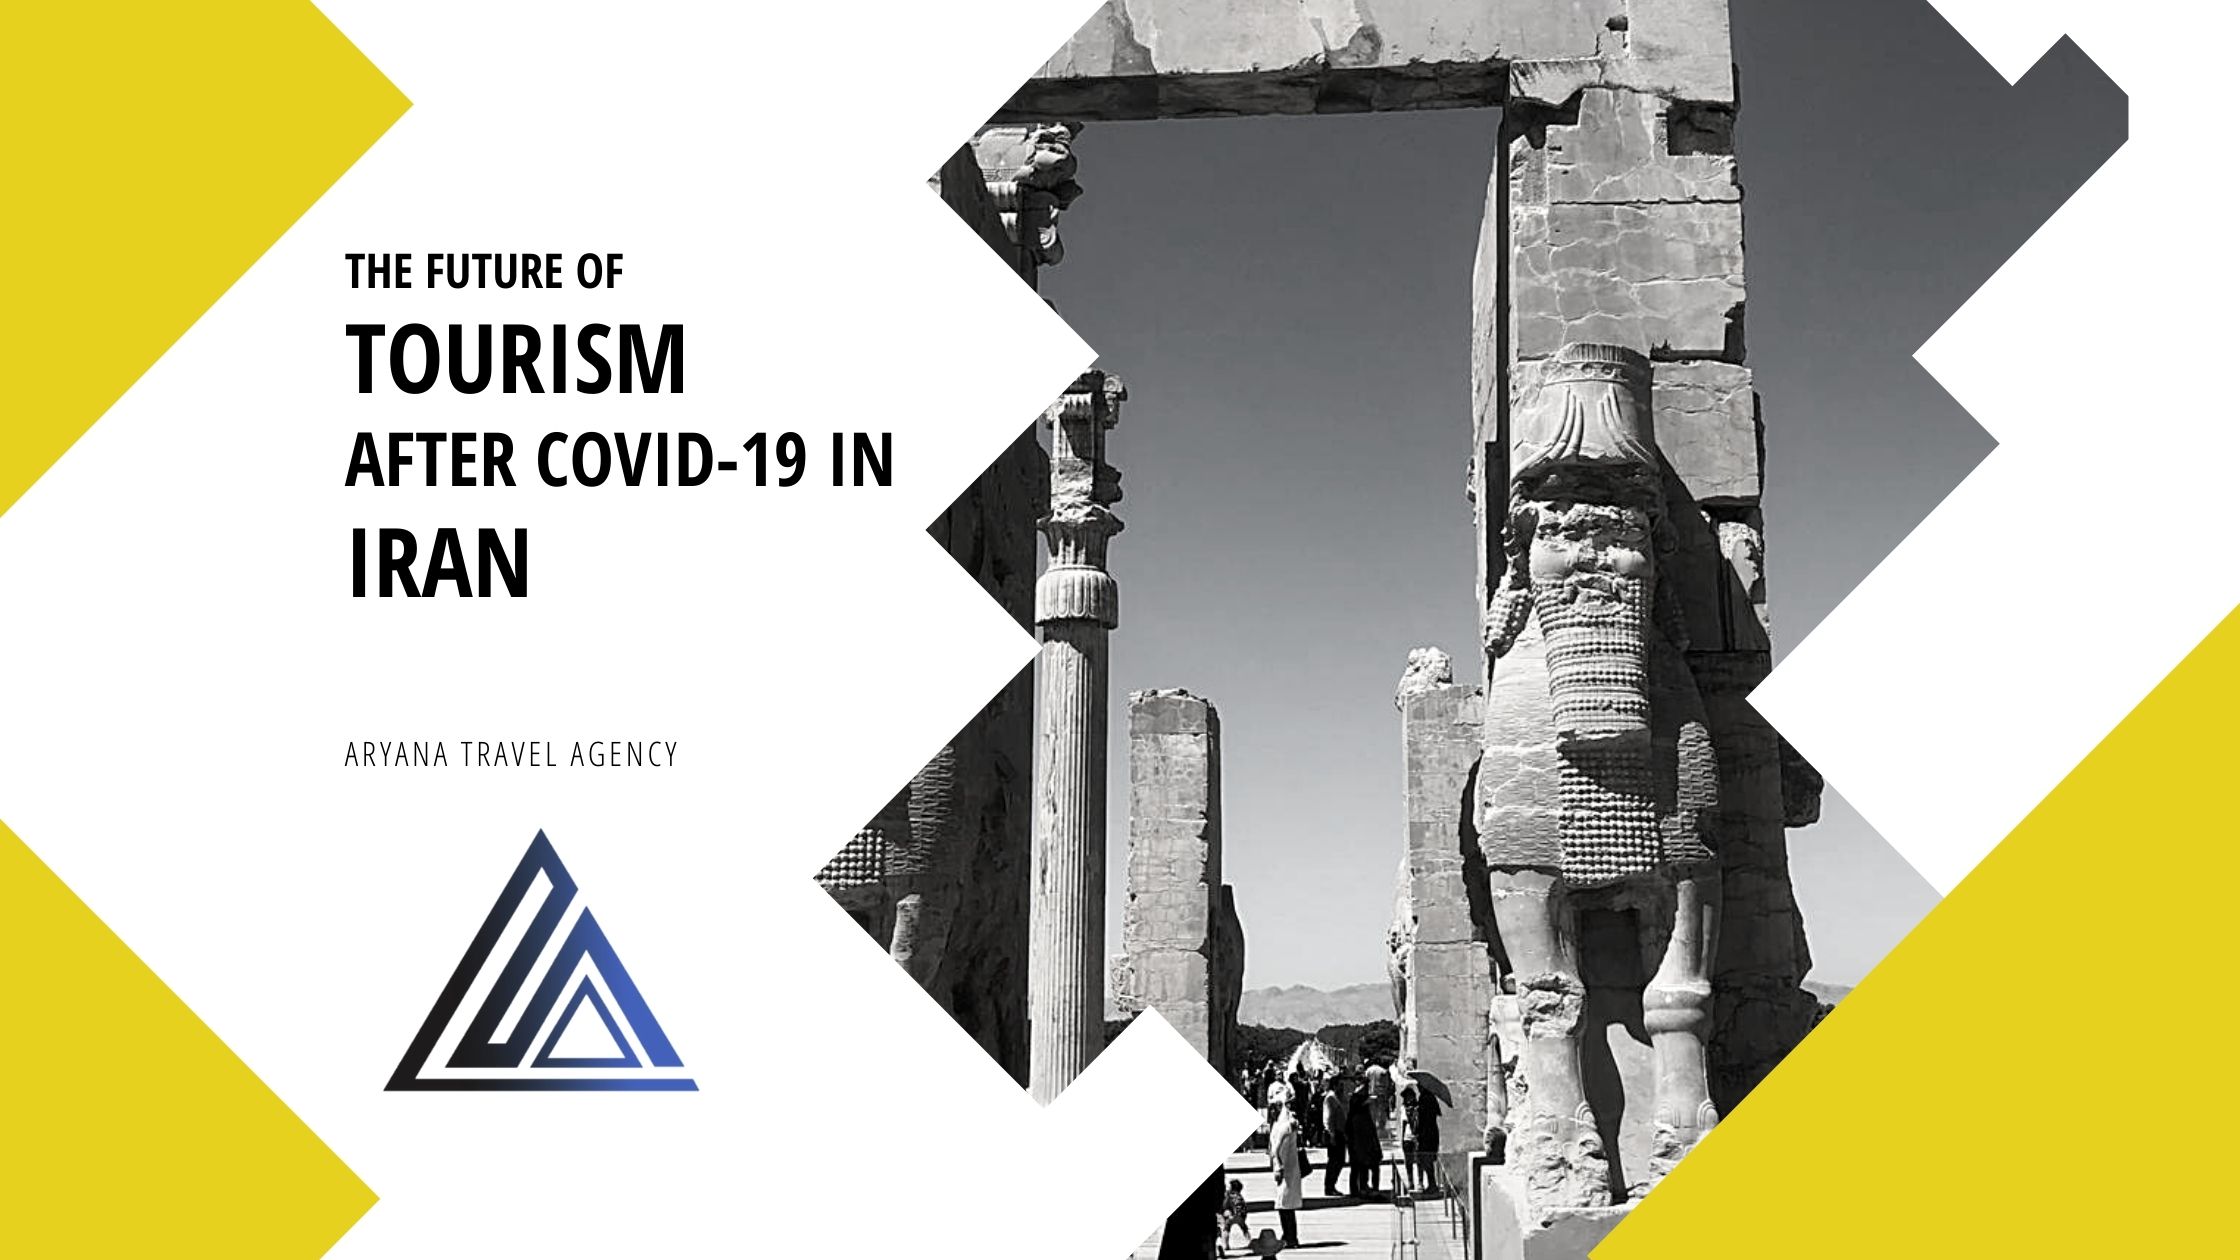 The Future of Tourism after COVID-19 in Iran